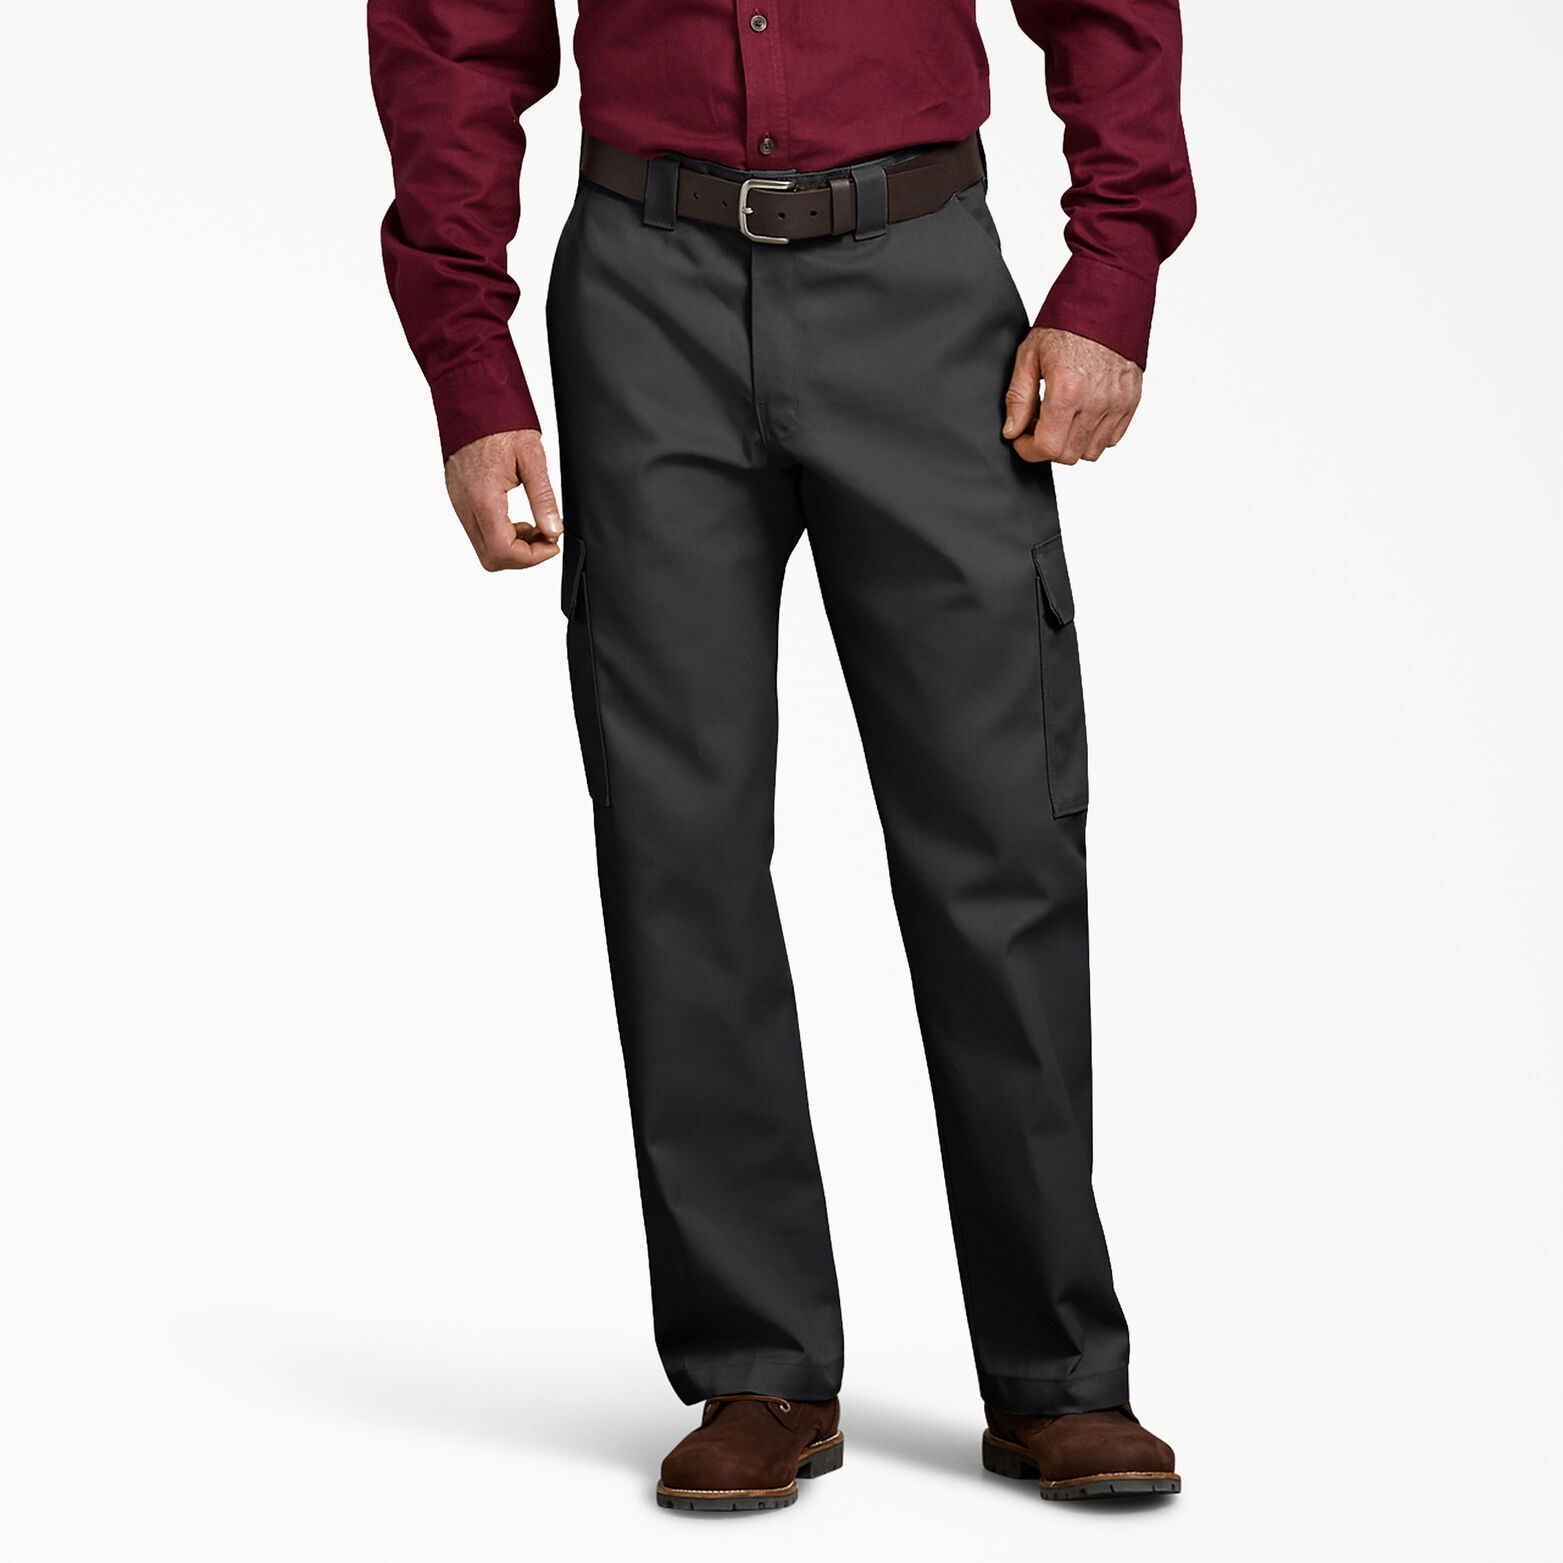 Relaxed Fit Straight Cargo Work Pants | Men's Pants Dickies